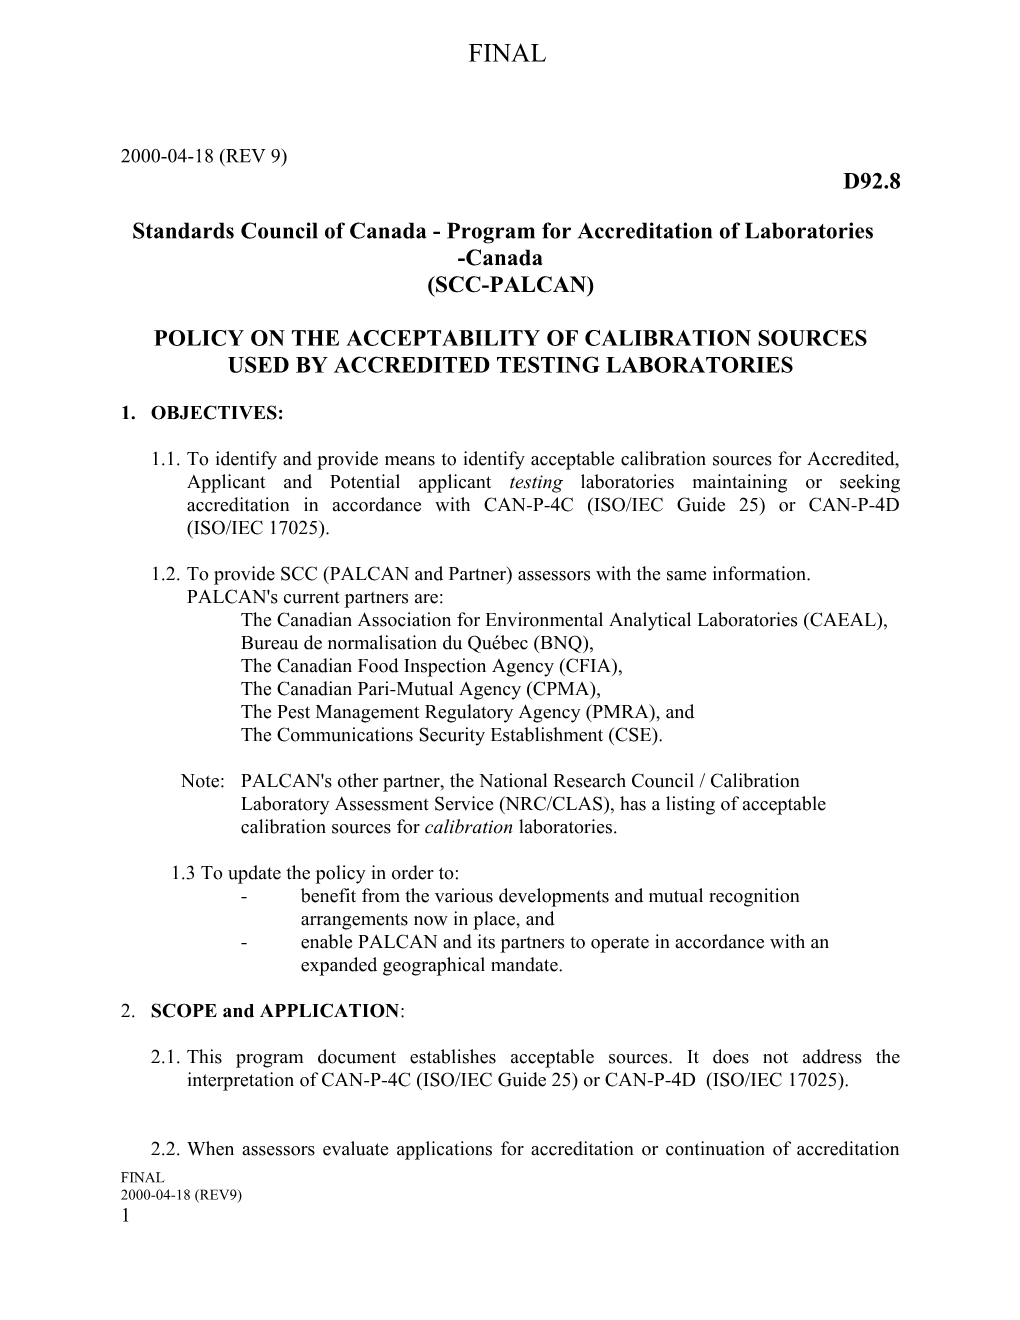 Standards Council of Canada - Program for Accreditation of Laboratories -Canada